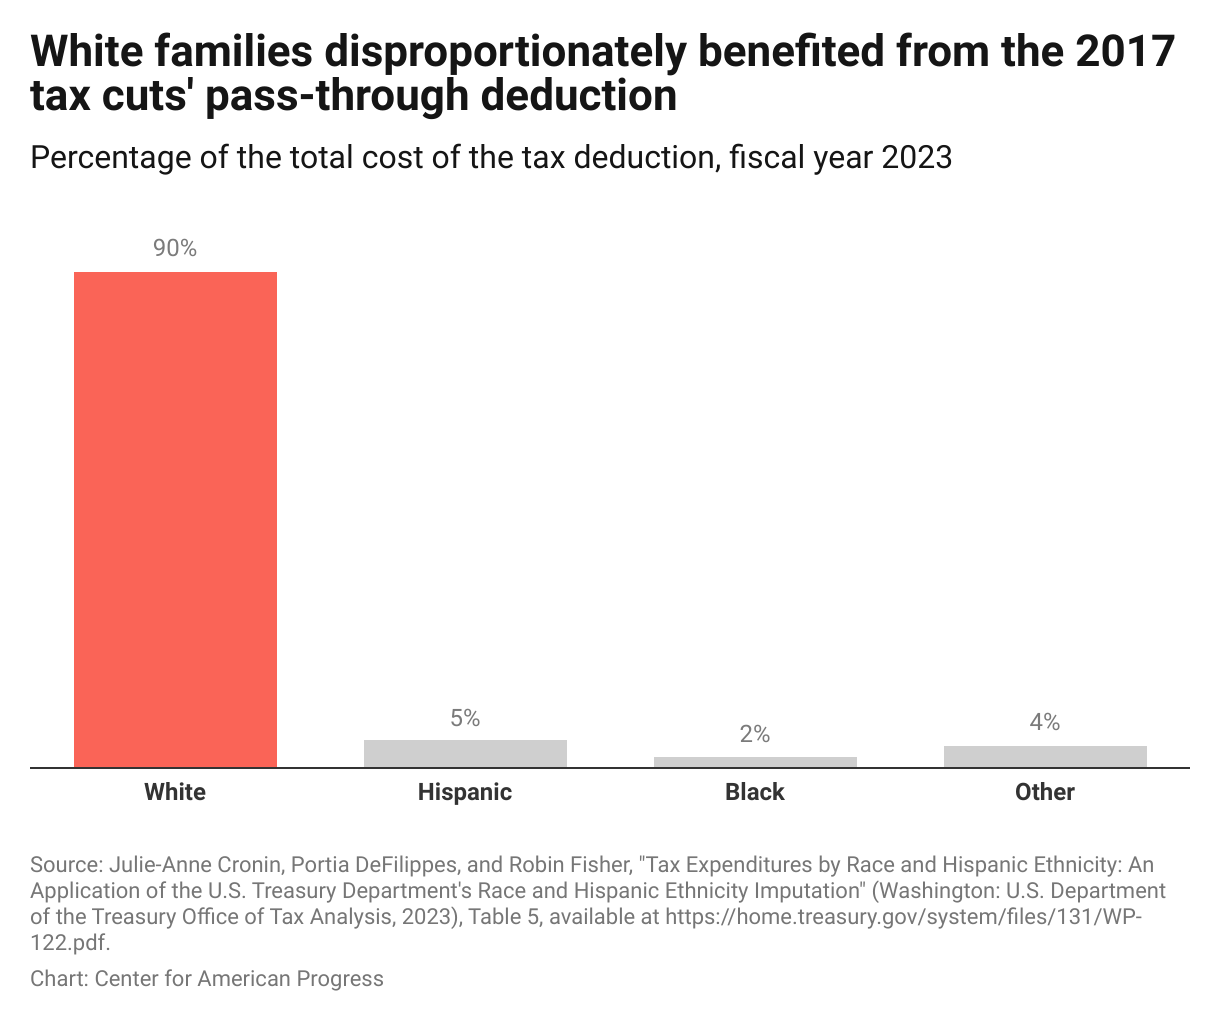 Column graph showing that white households disproportionately benefited from the 199A deduction tax break.